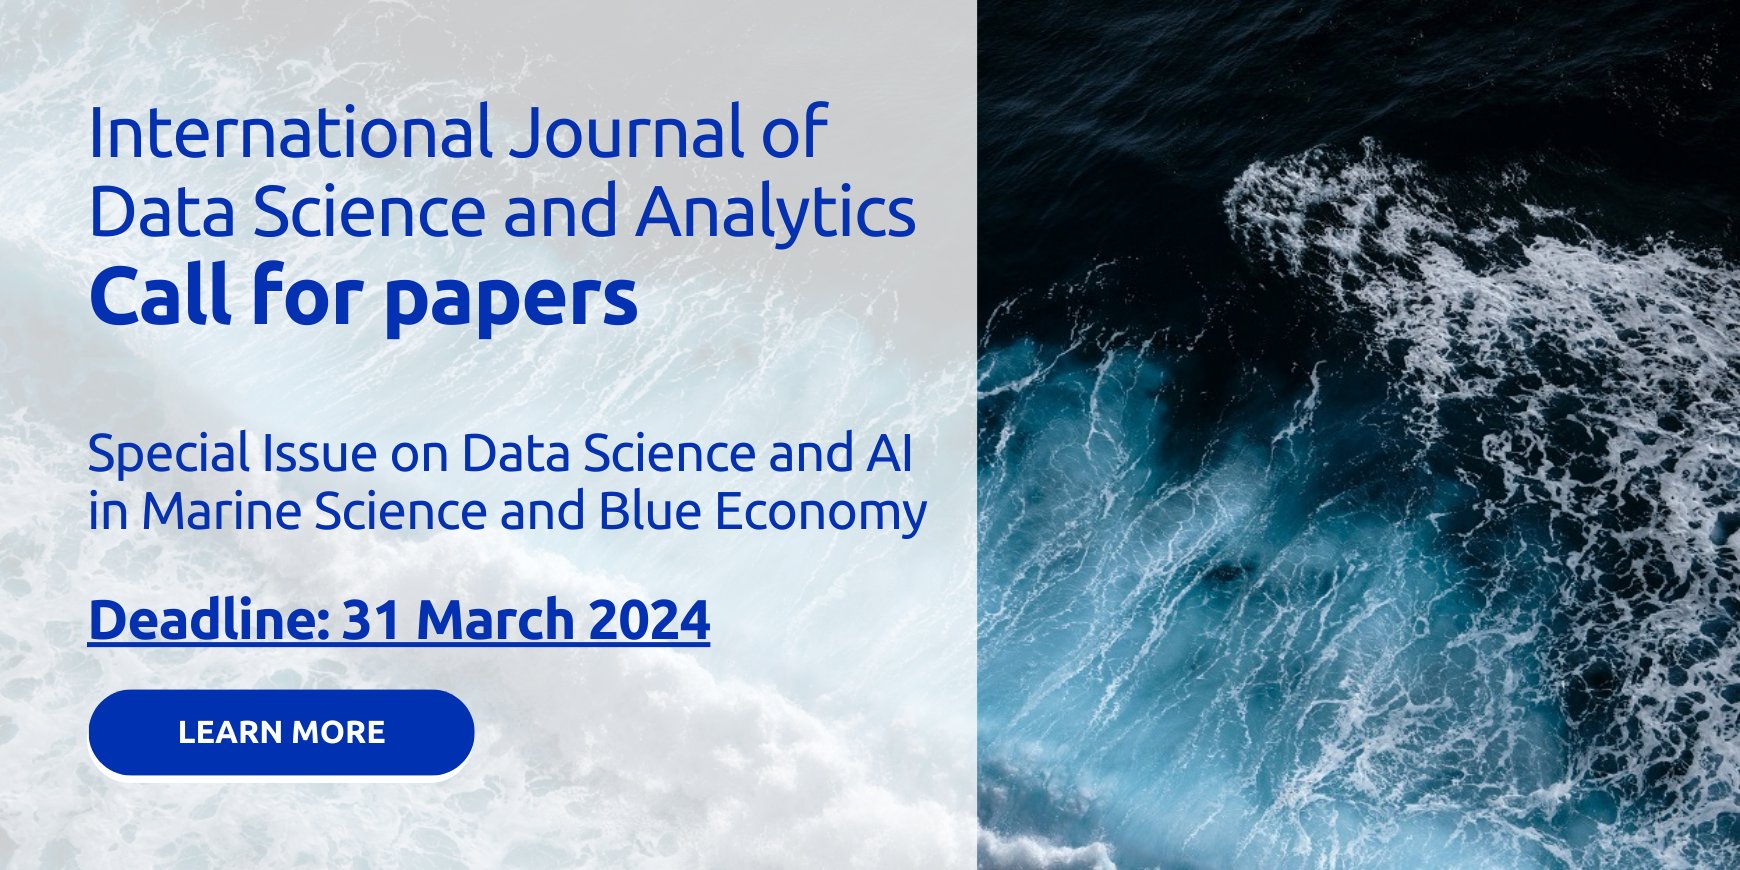 International Journal of Data Science and Analytics Call for Papers: Special Issue on Data Science and AI in Marine Science and Blue Economy